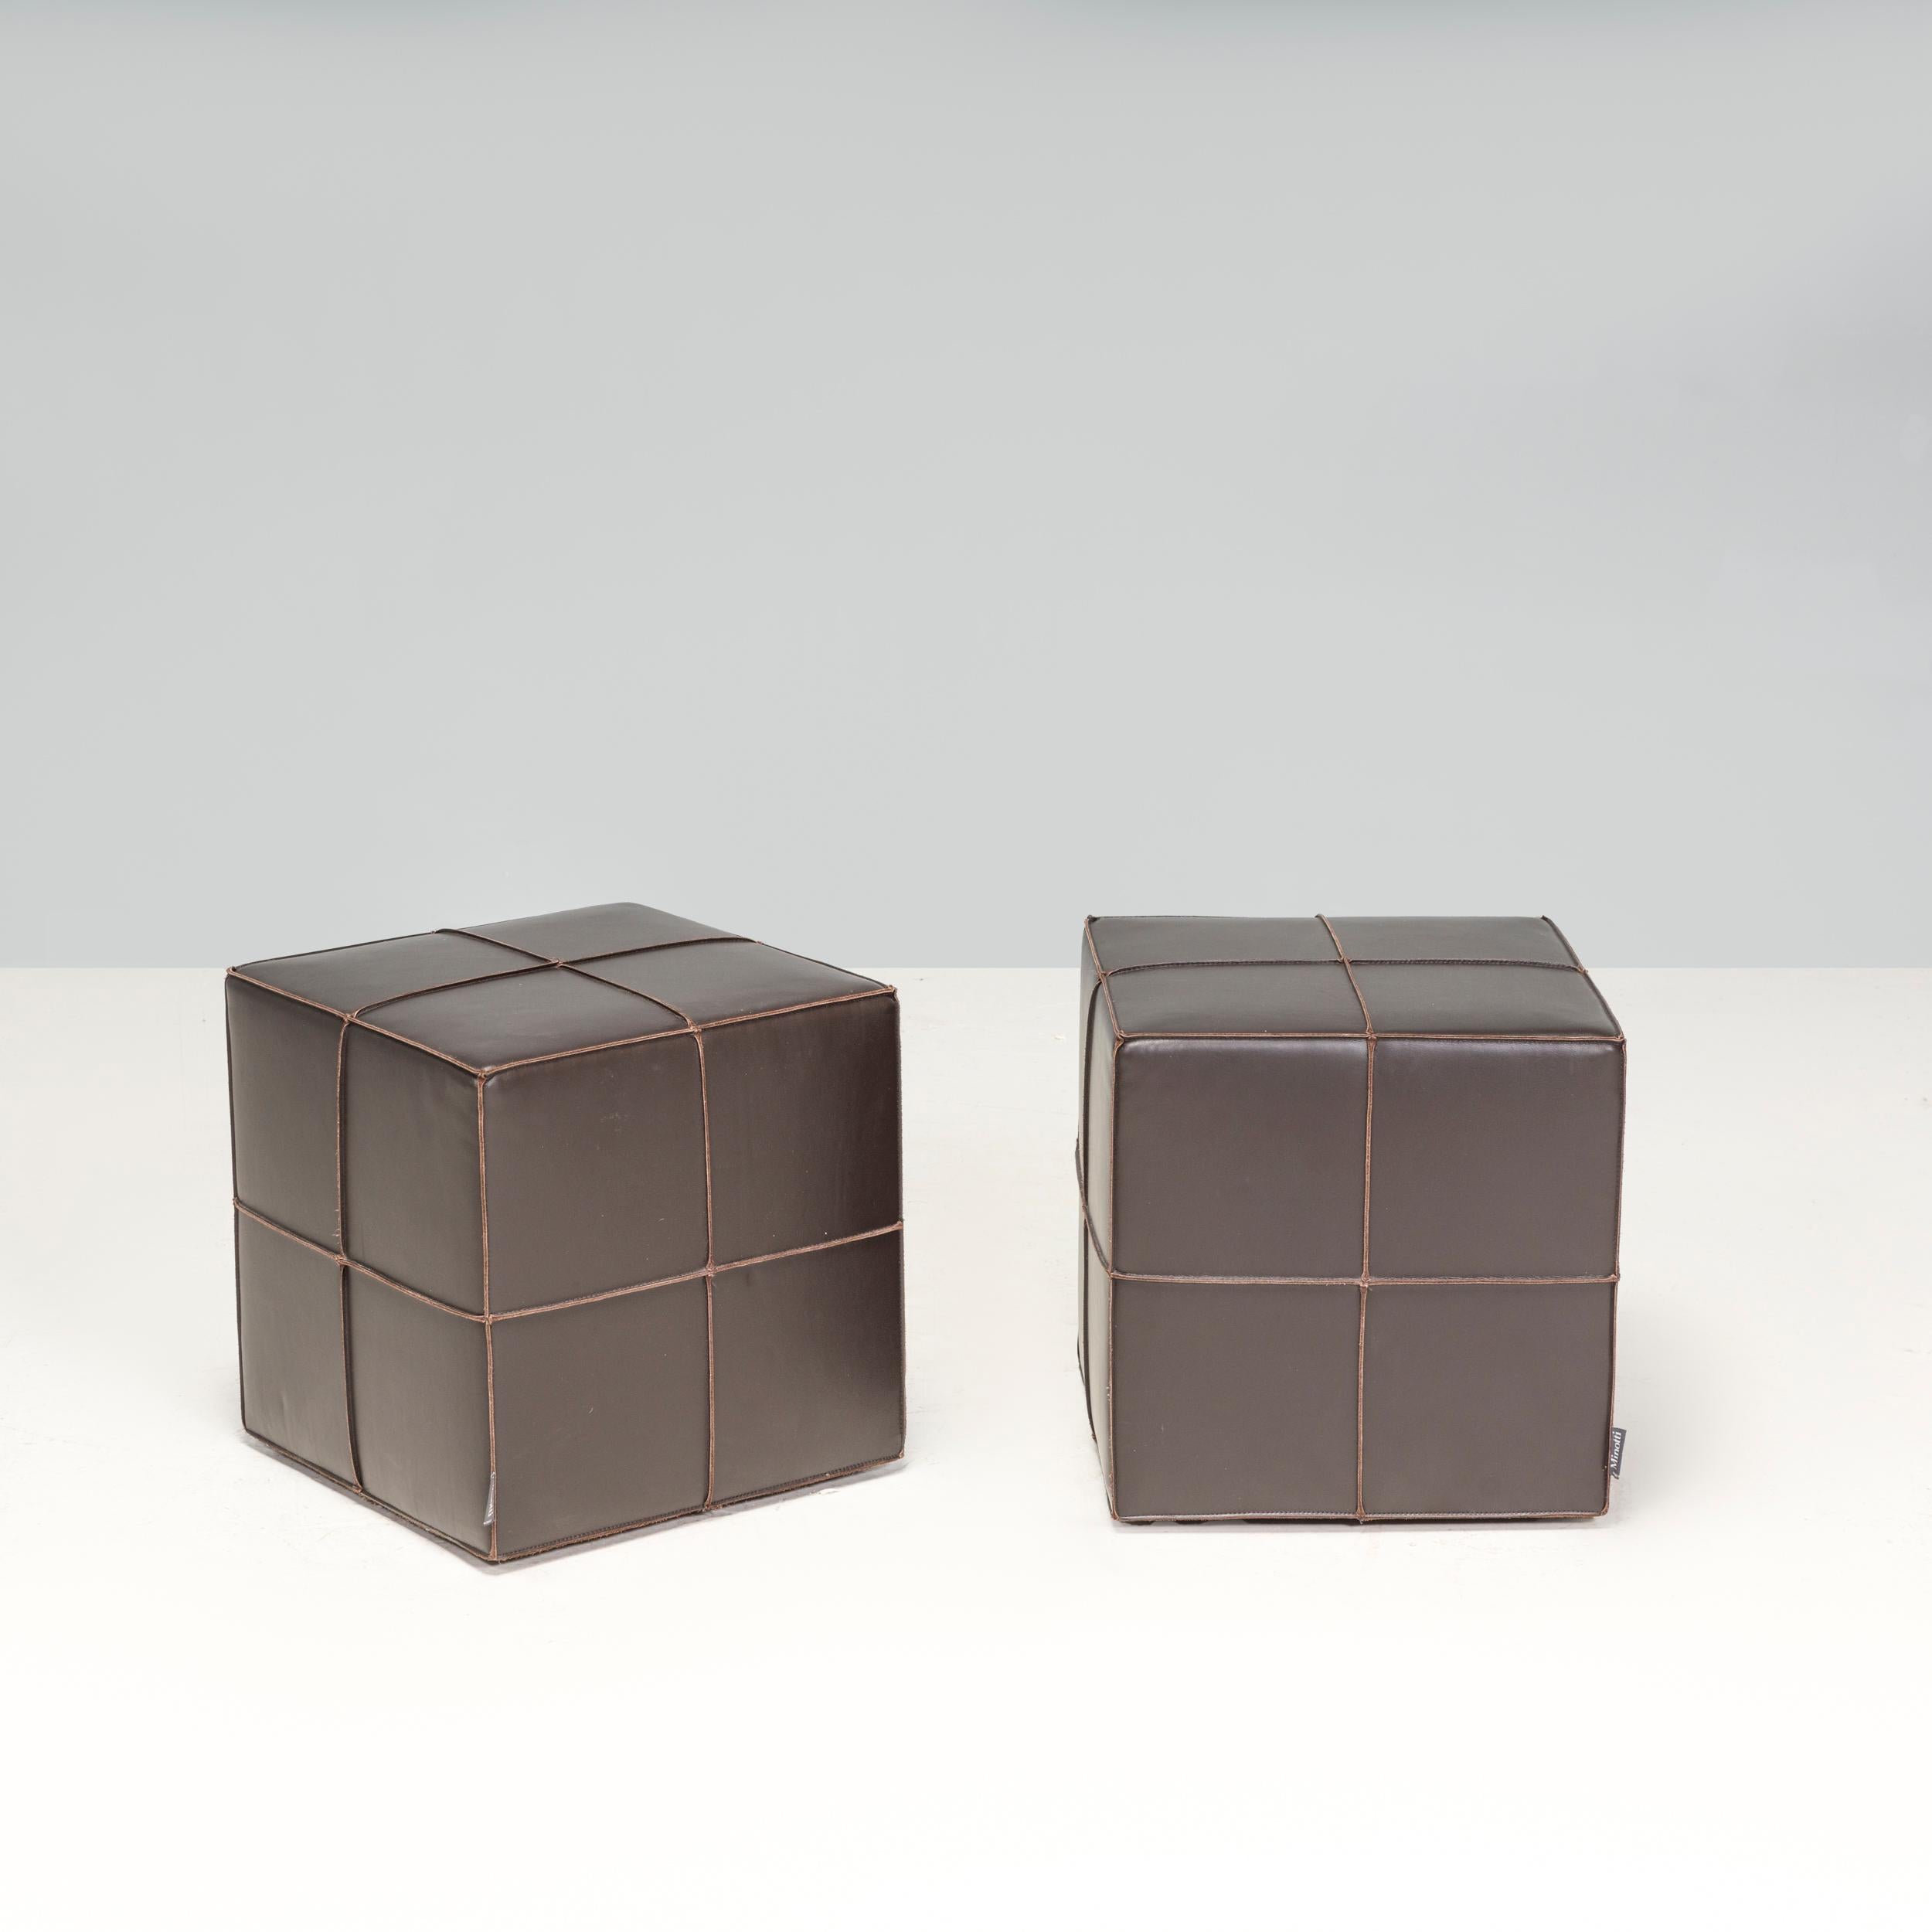 Minotti By Rodolfo Dordoni Villon Pouffe Ottomans Chocolate Leather, Set of Two In Good Condition For Sale In London, GB